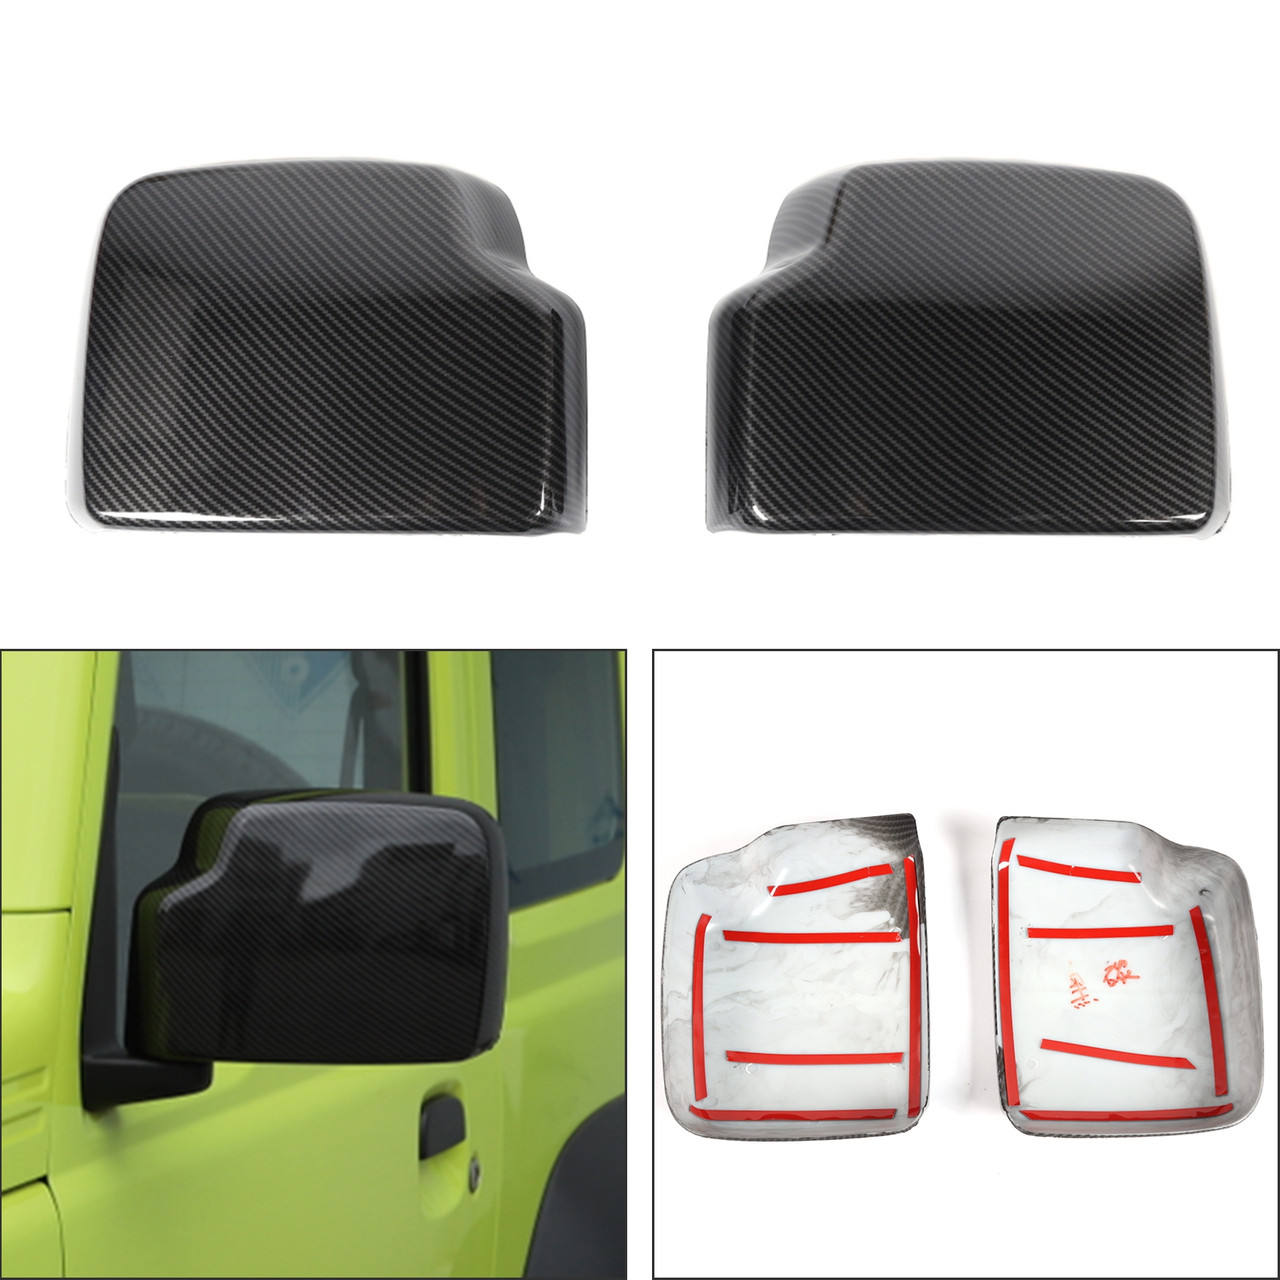 ABS Exterior Rearview Mirror Cover Fit For Suzuki Jimny 19-20 Carbon